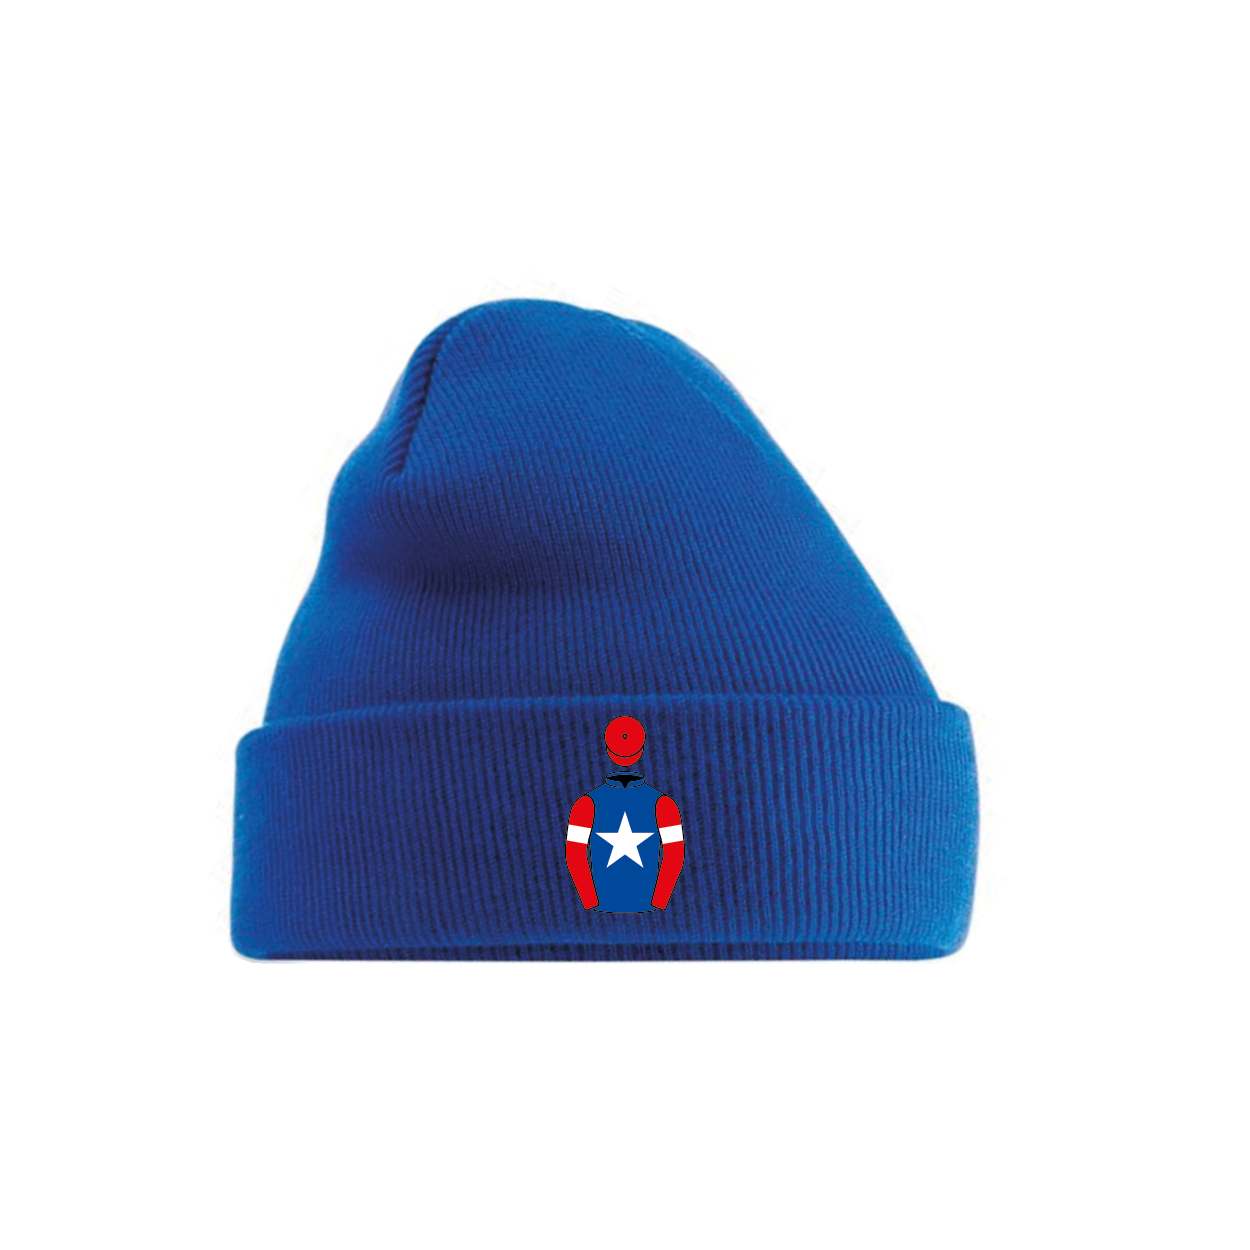 The Racing Emporium Embroidered Cuffed Beanie - Hacked Up